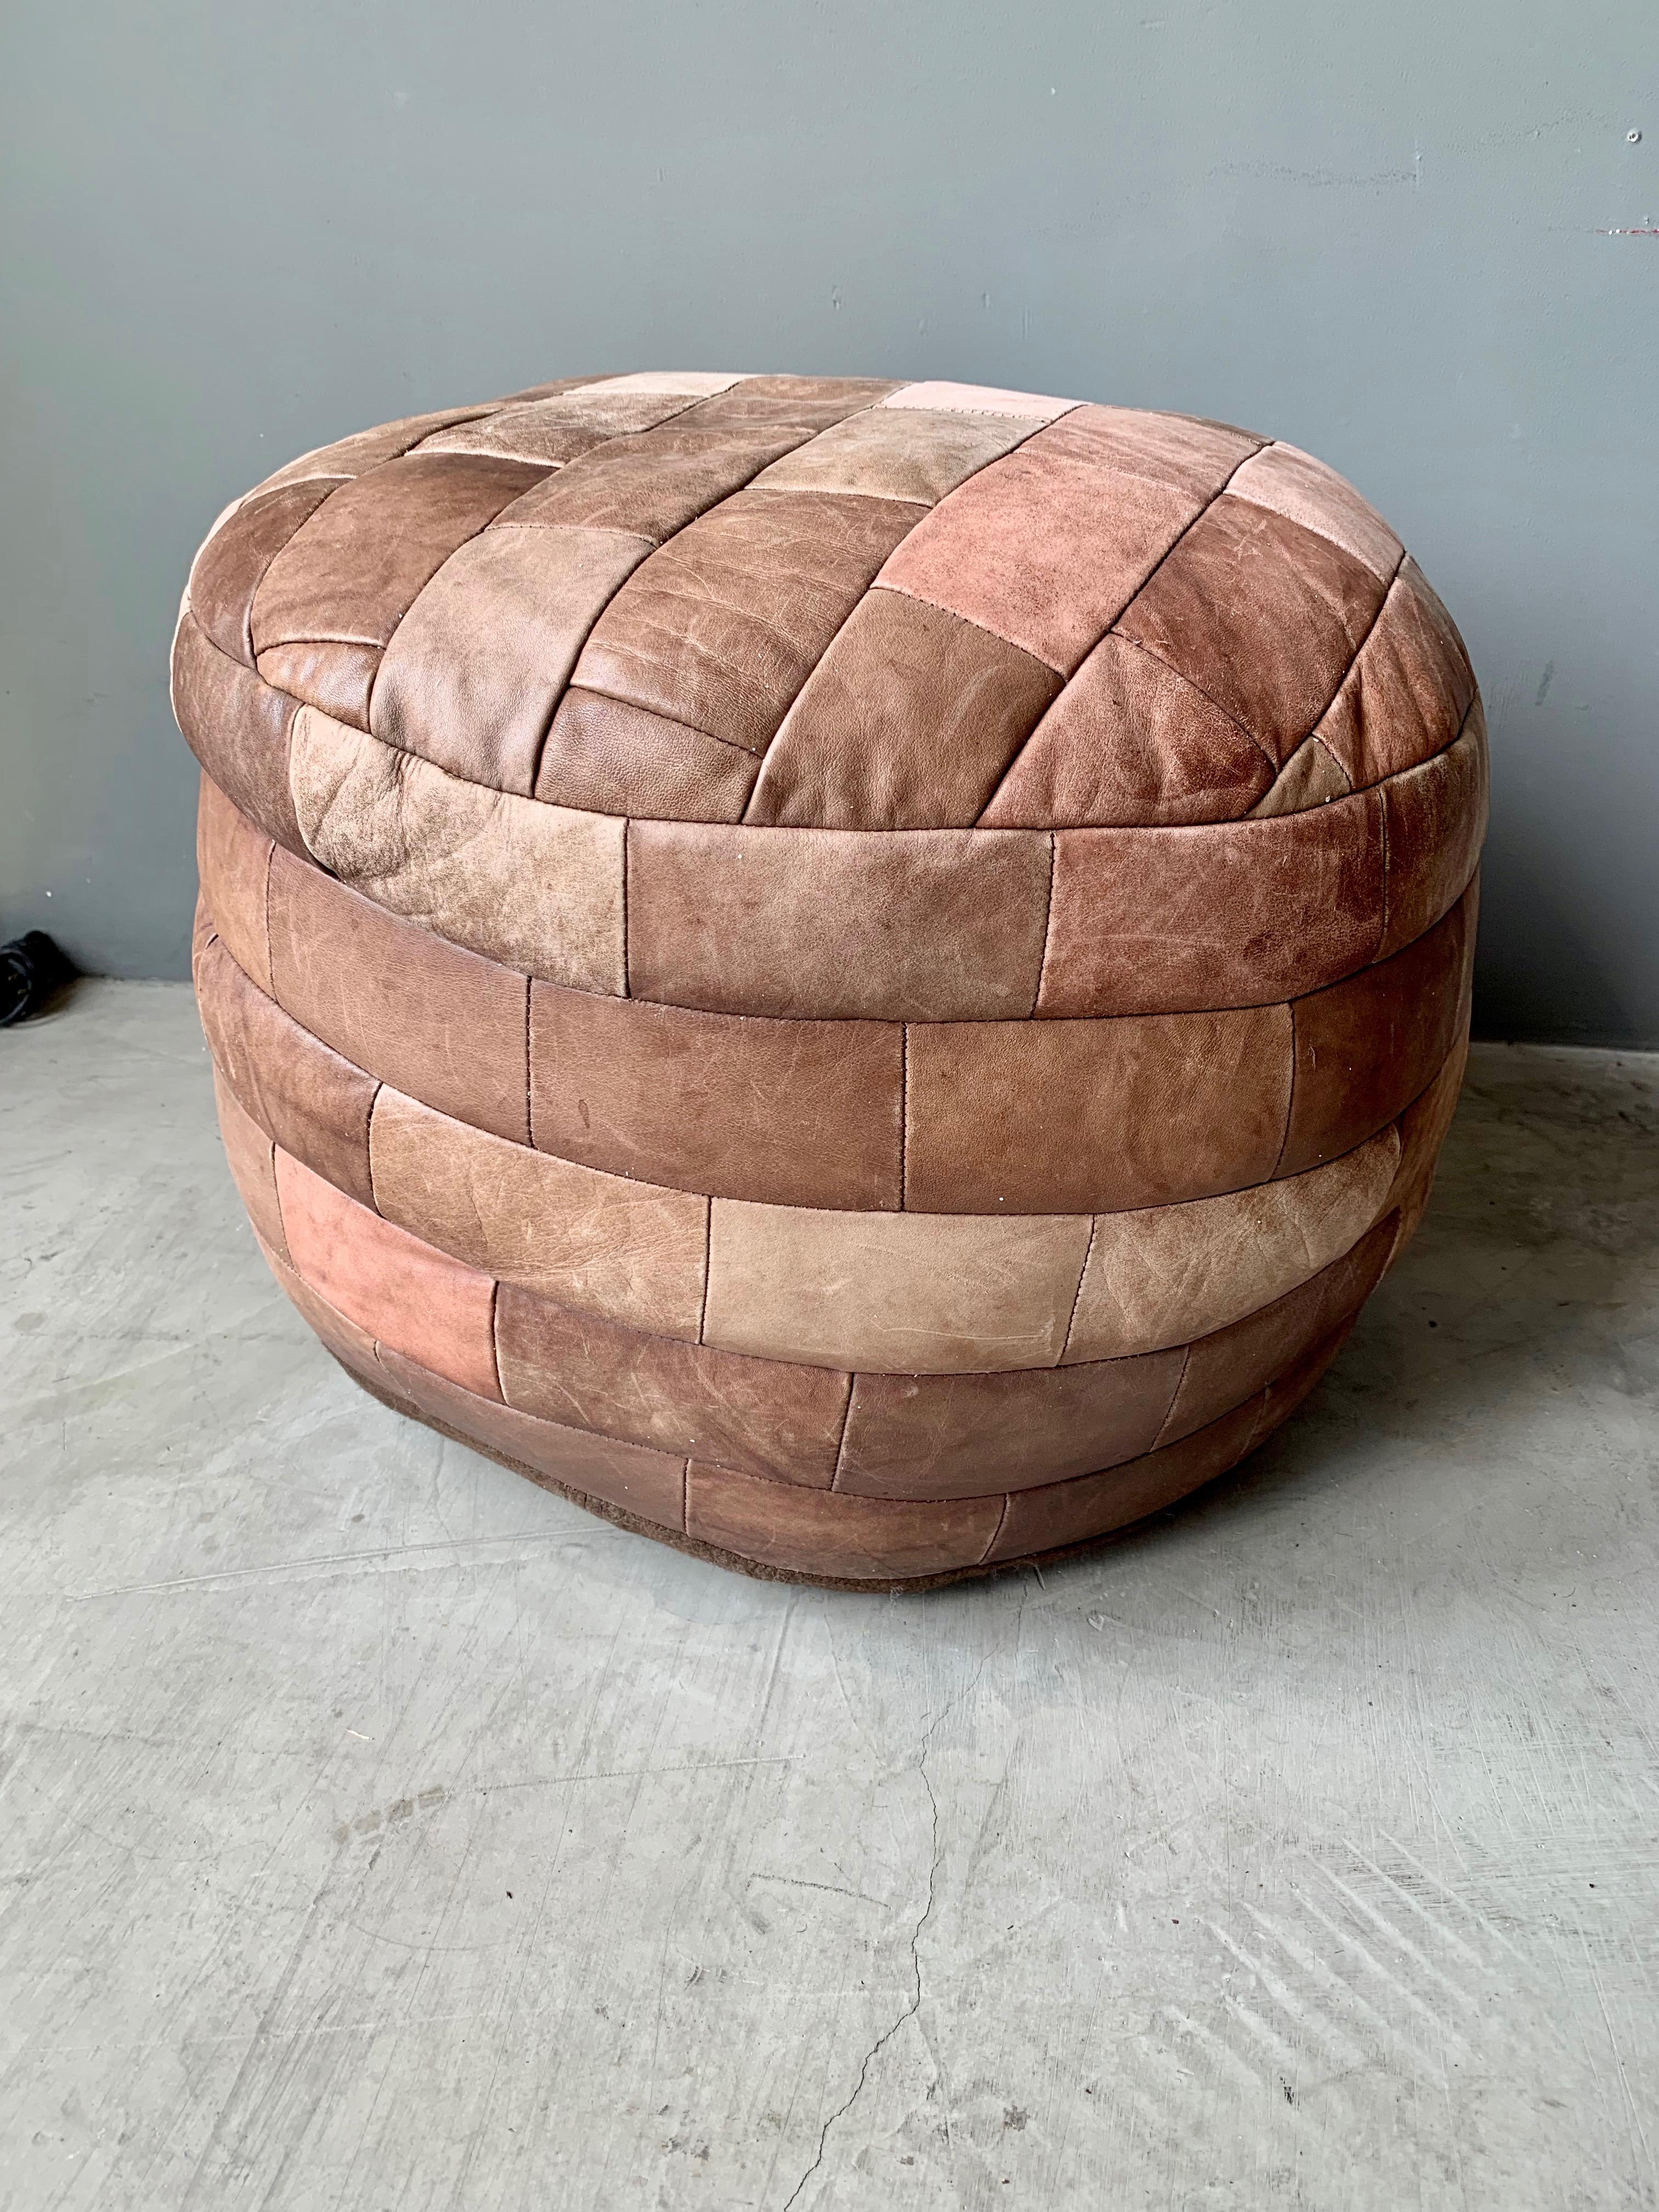 Unique patchwork leather ottoman by De Sede with multicolored tan/brown leather strips. Great coloring and patina to leather. Very good condition. Great accent piece.

10 plus ottomans and beanbags by De Sede in our other listings.

  